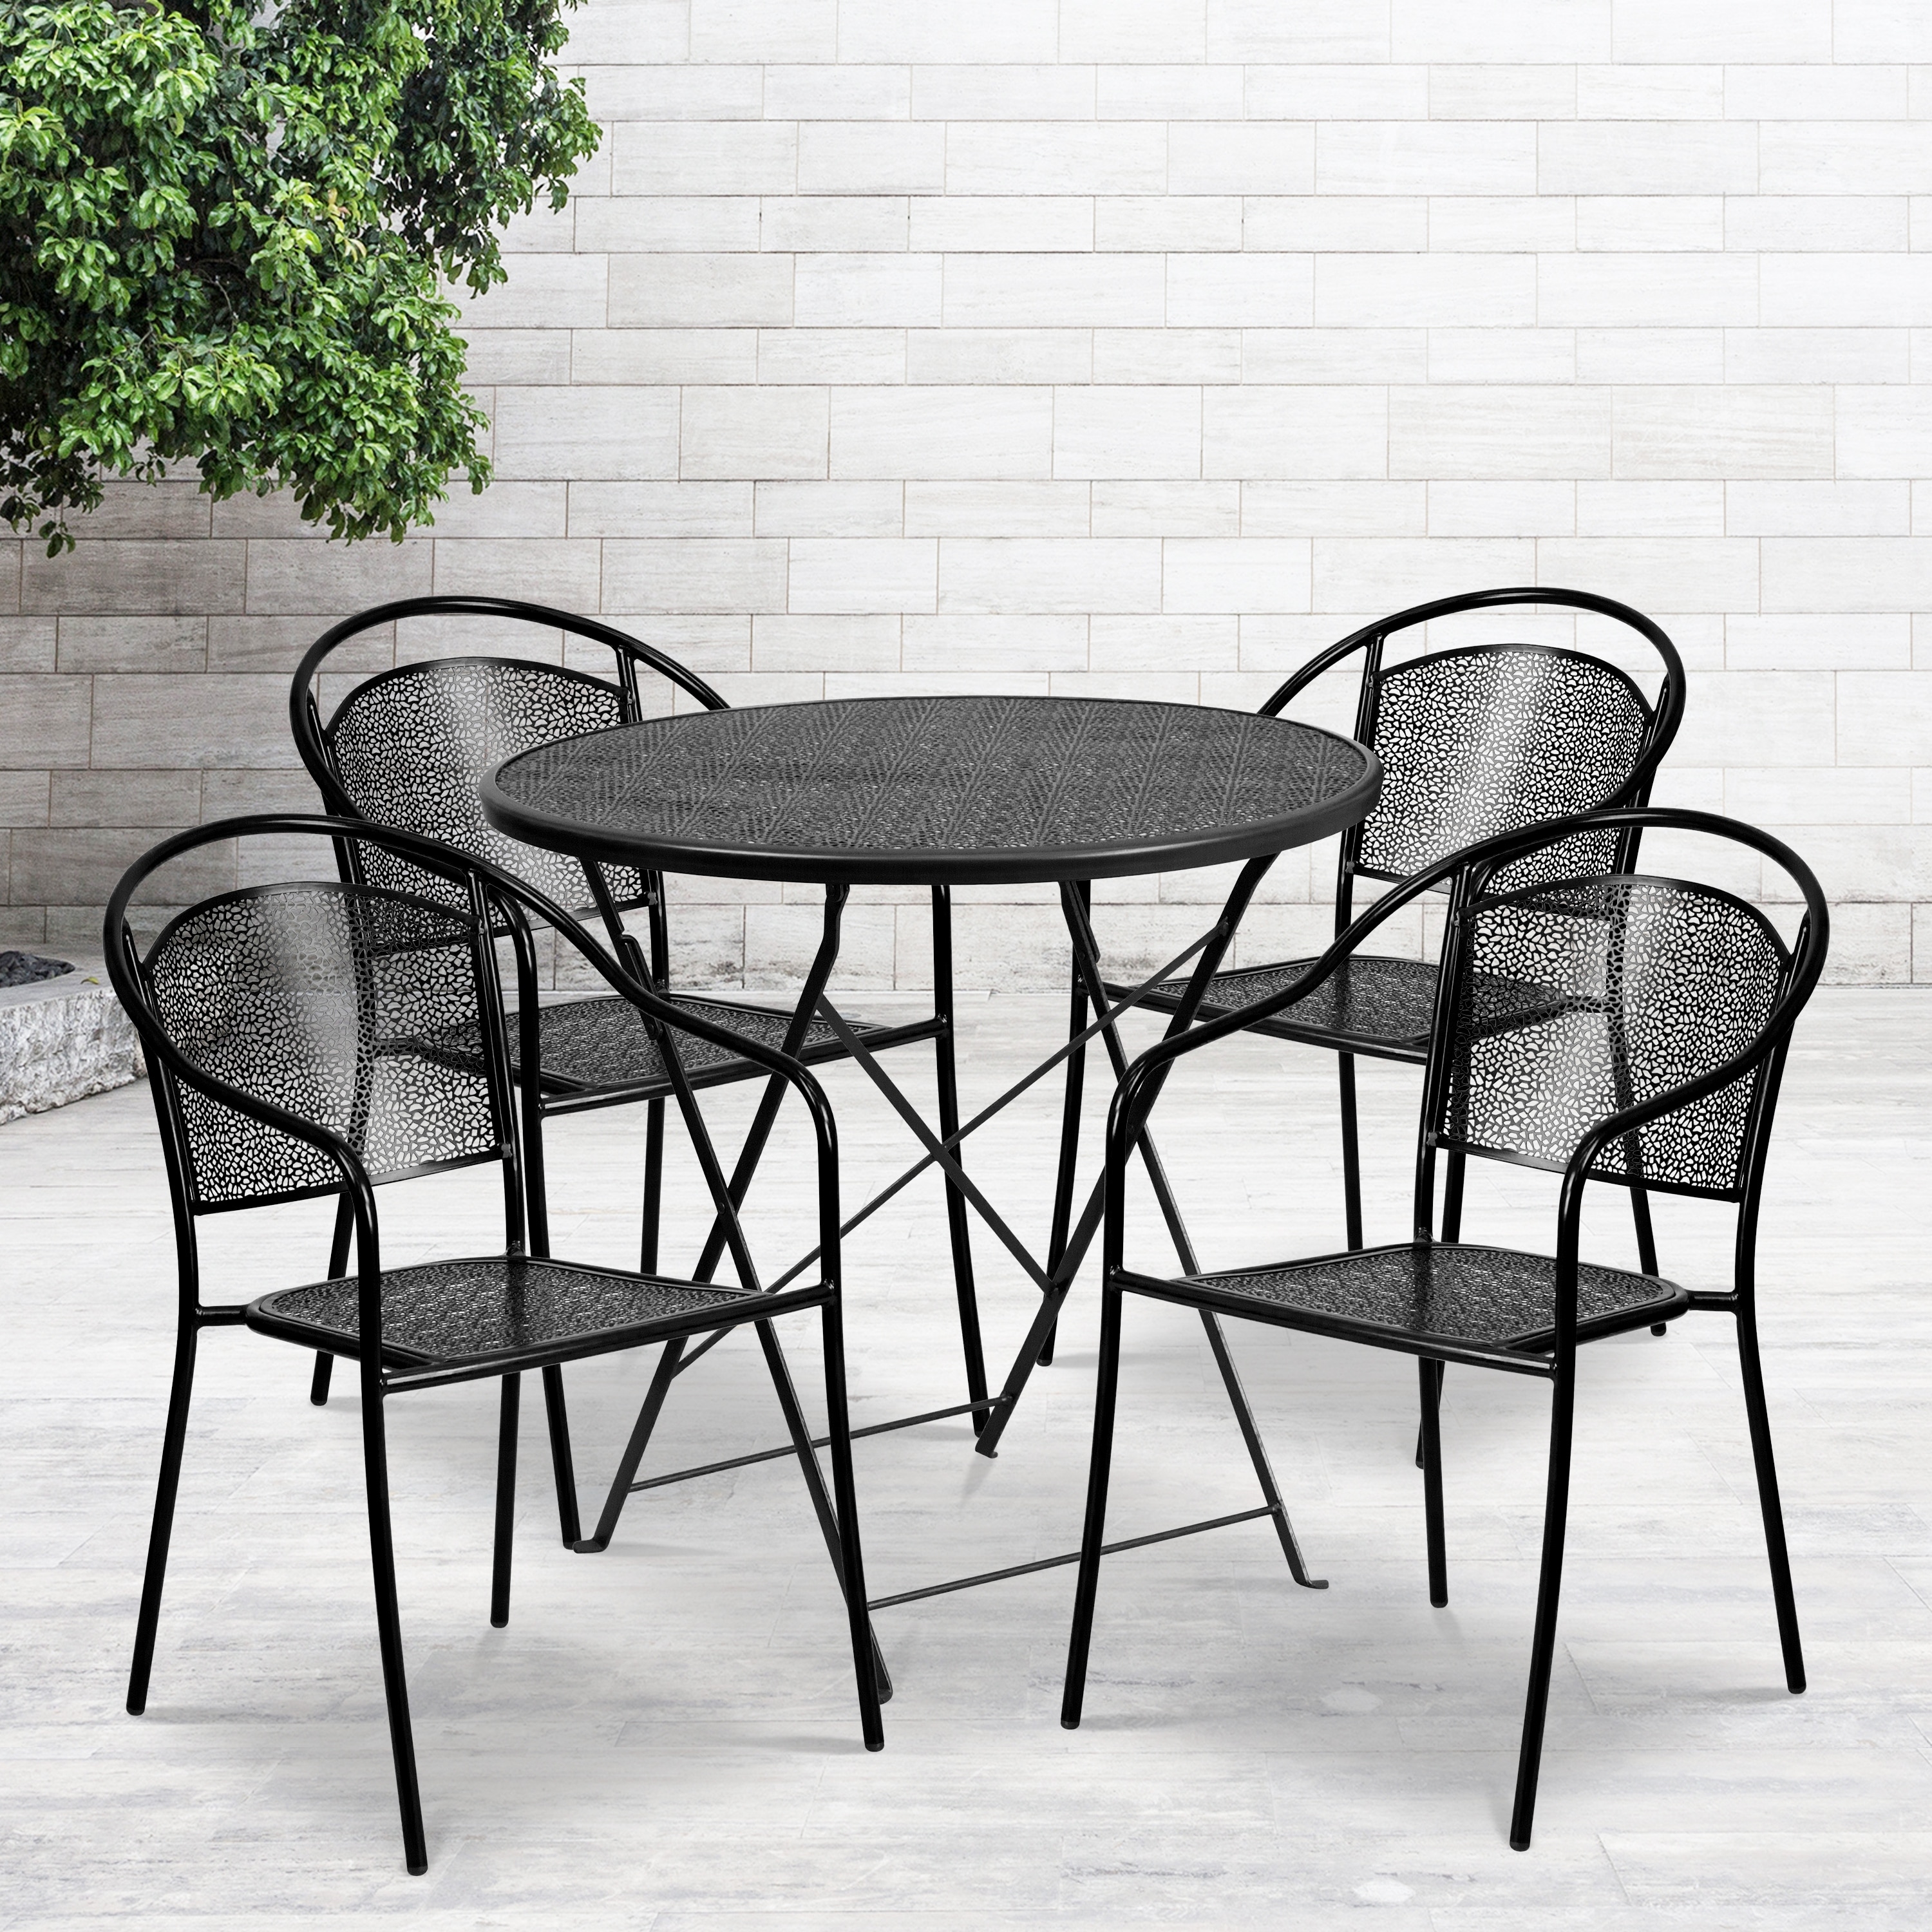 Flash Furniture 30-in. Round Steel Folding Patio Table Set w/ 4 Chairs Black - image 1 of 5